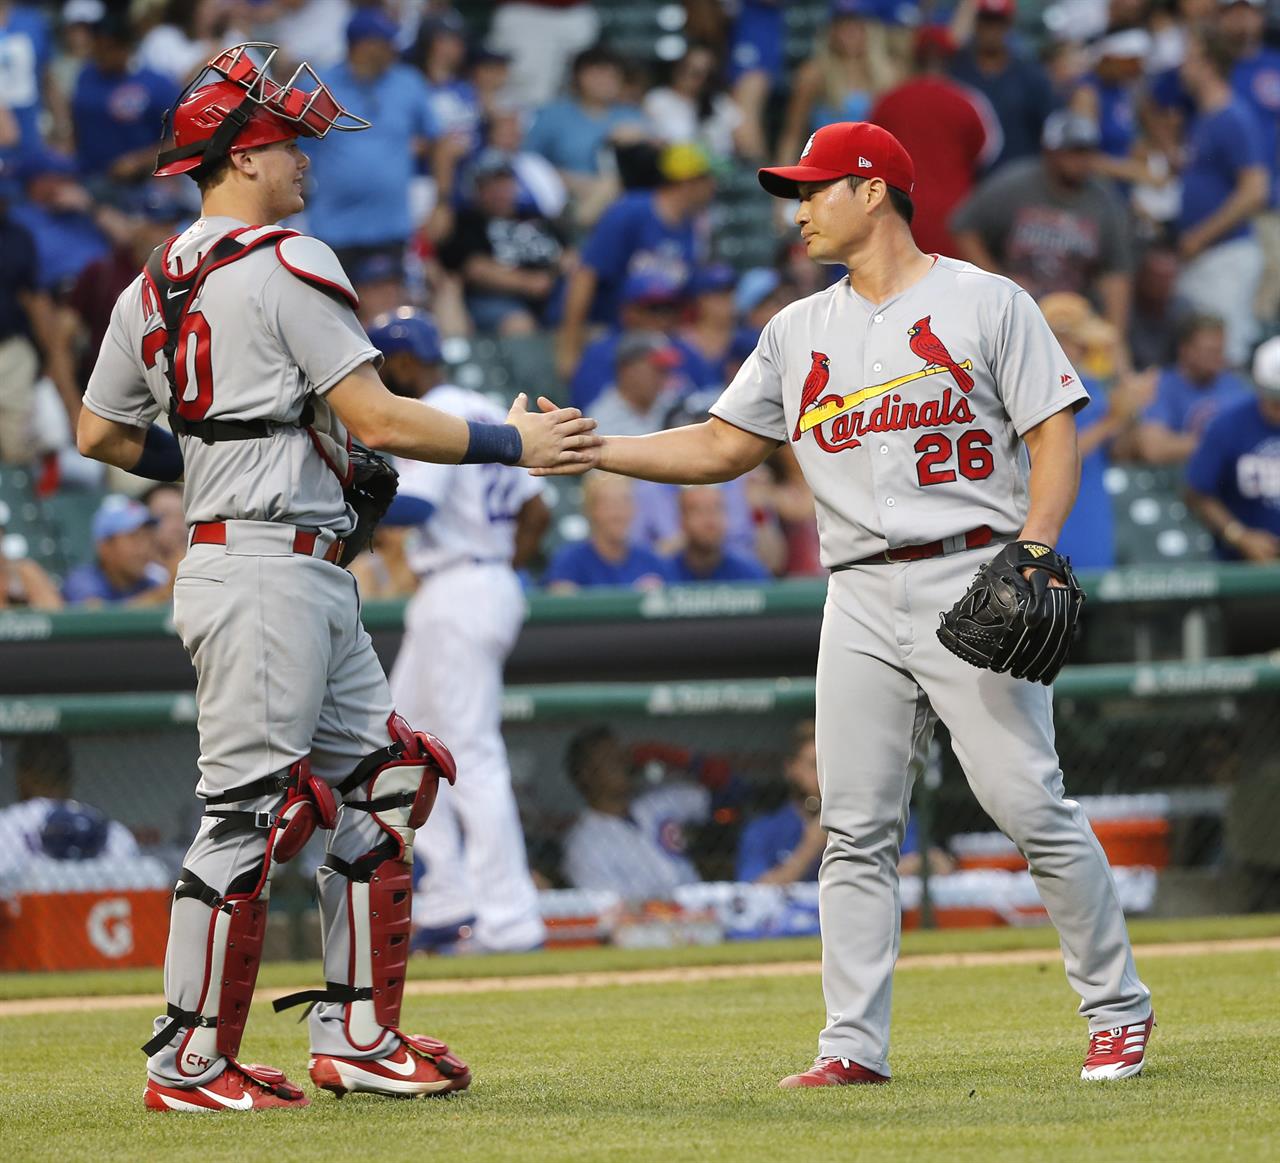 Cardinals score 9 in 8th, cool off Cubs with 11-4 win | AM 1190 WAFS - Atlanta, GA